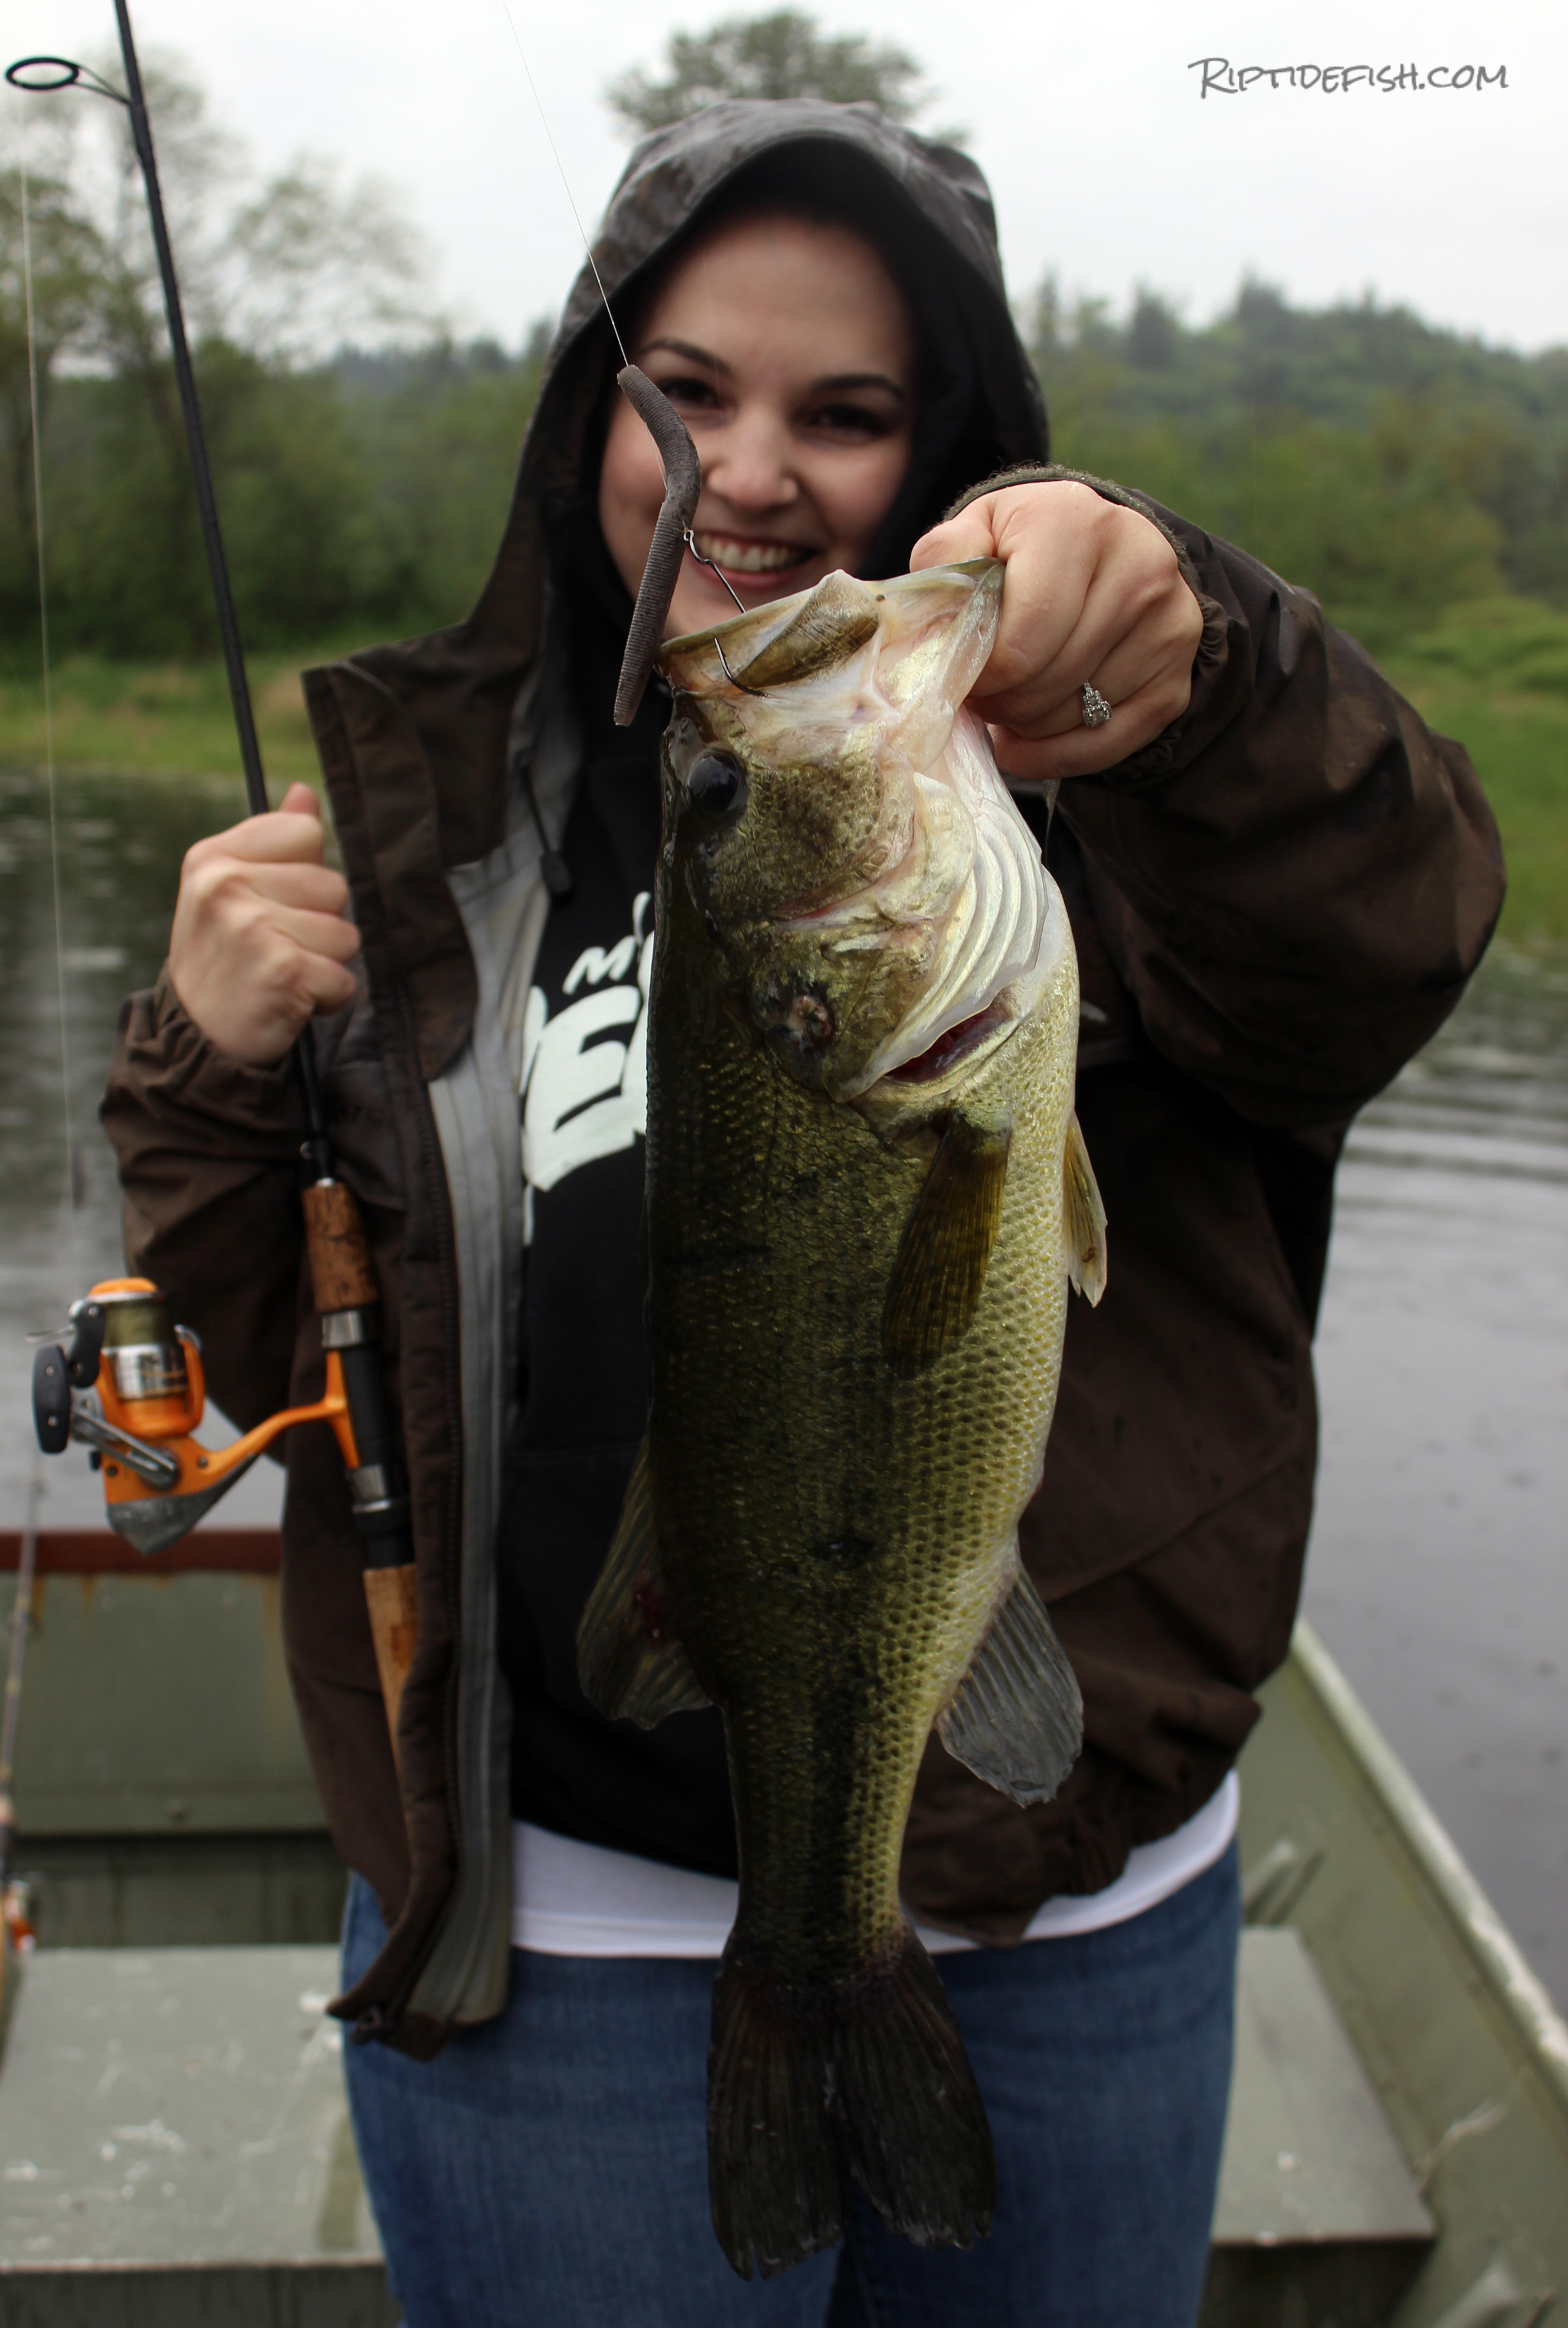 14 Awesome Fishing Lakes in the Snoqualmie Valley - Riptidefish